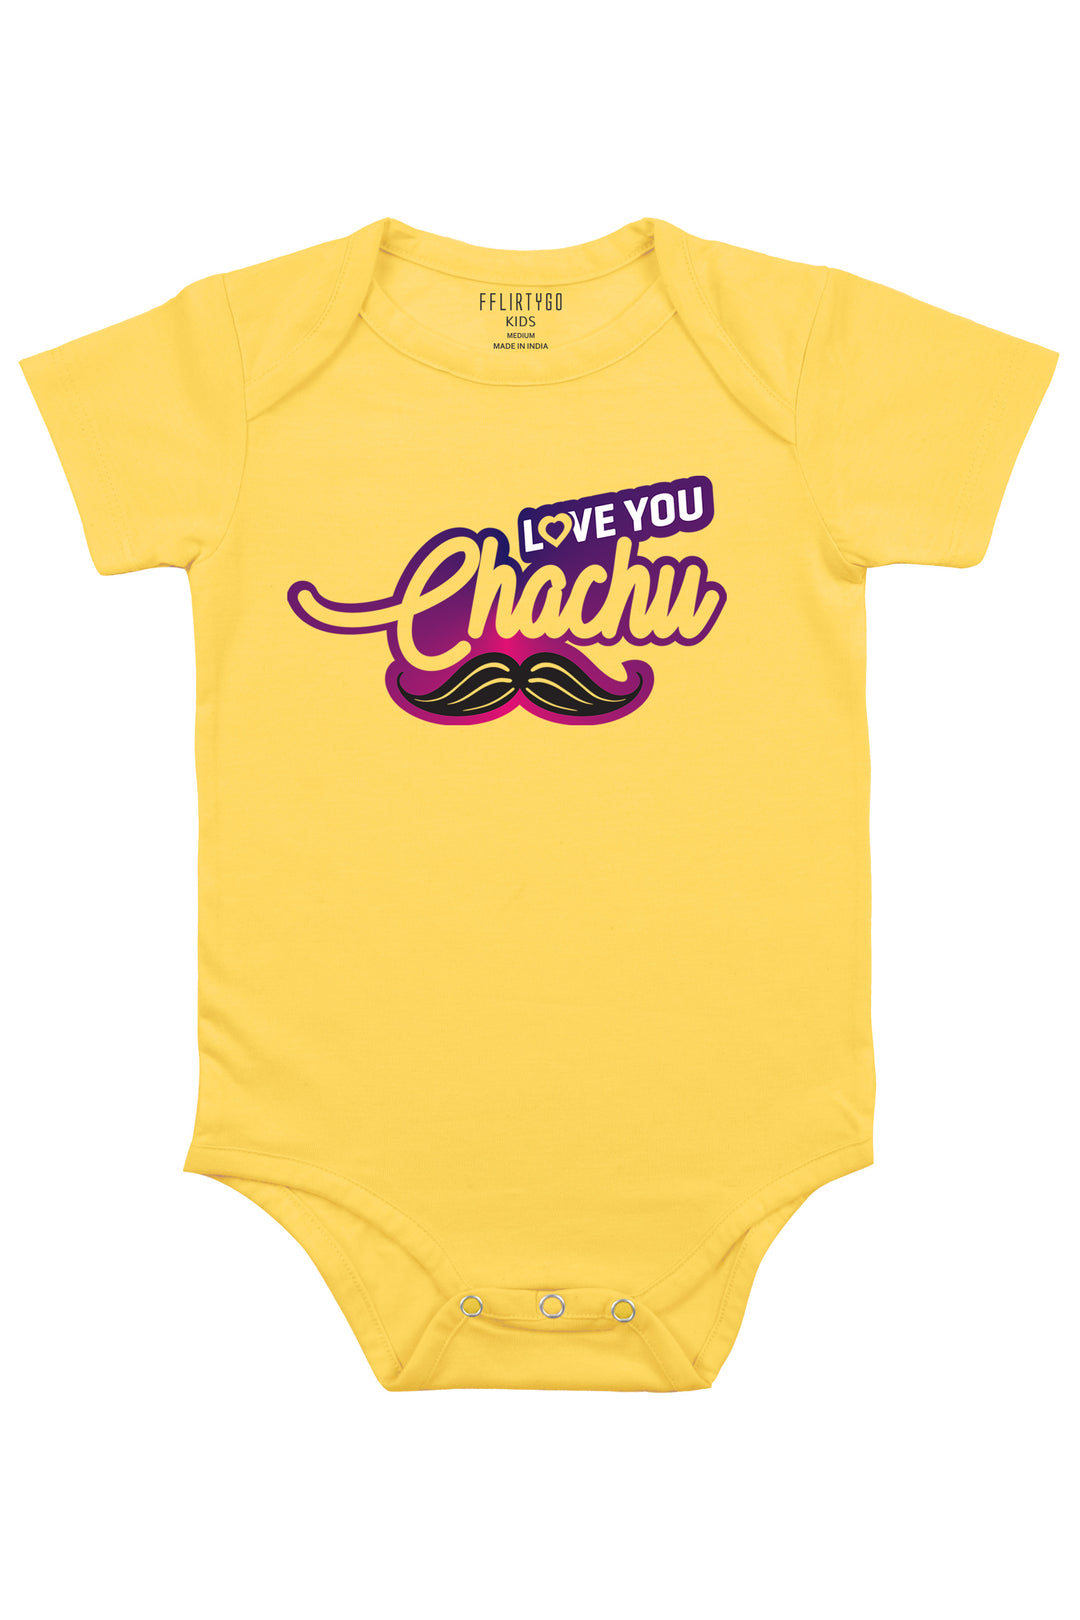 Love You Chachu Baby Romper | Onesies